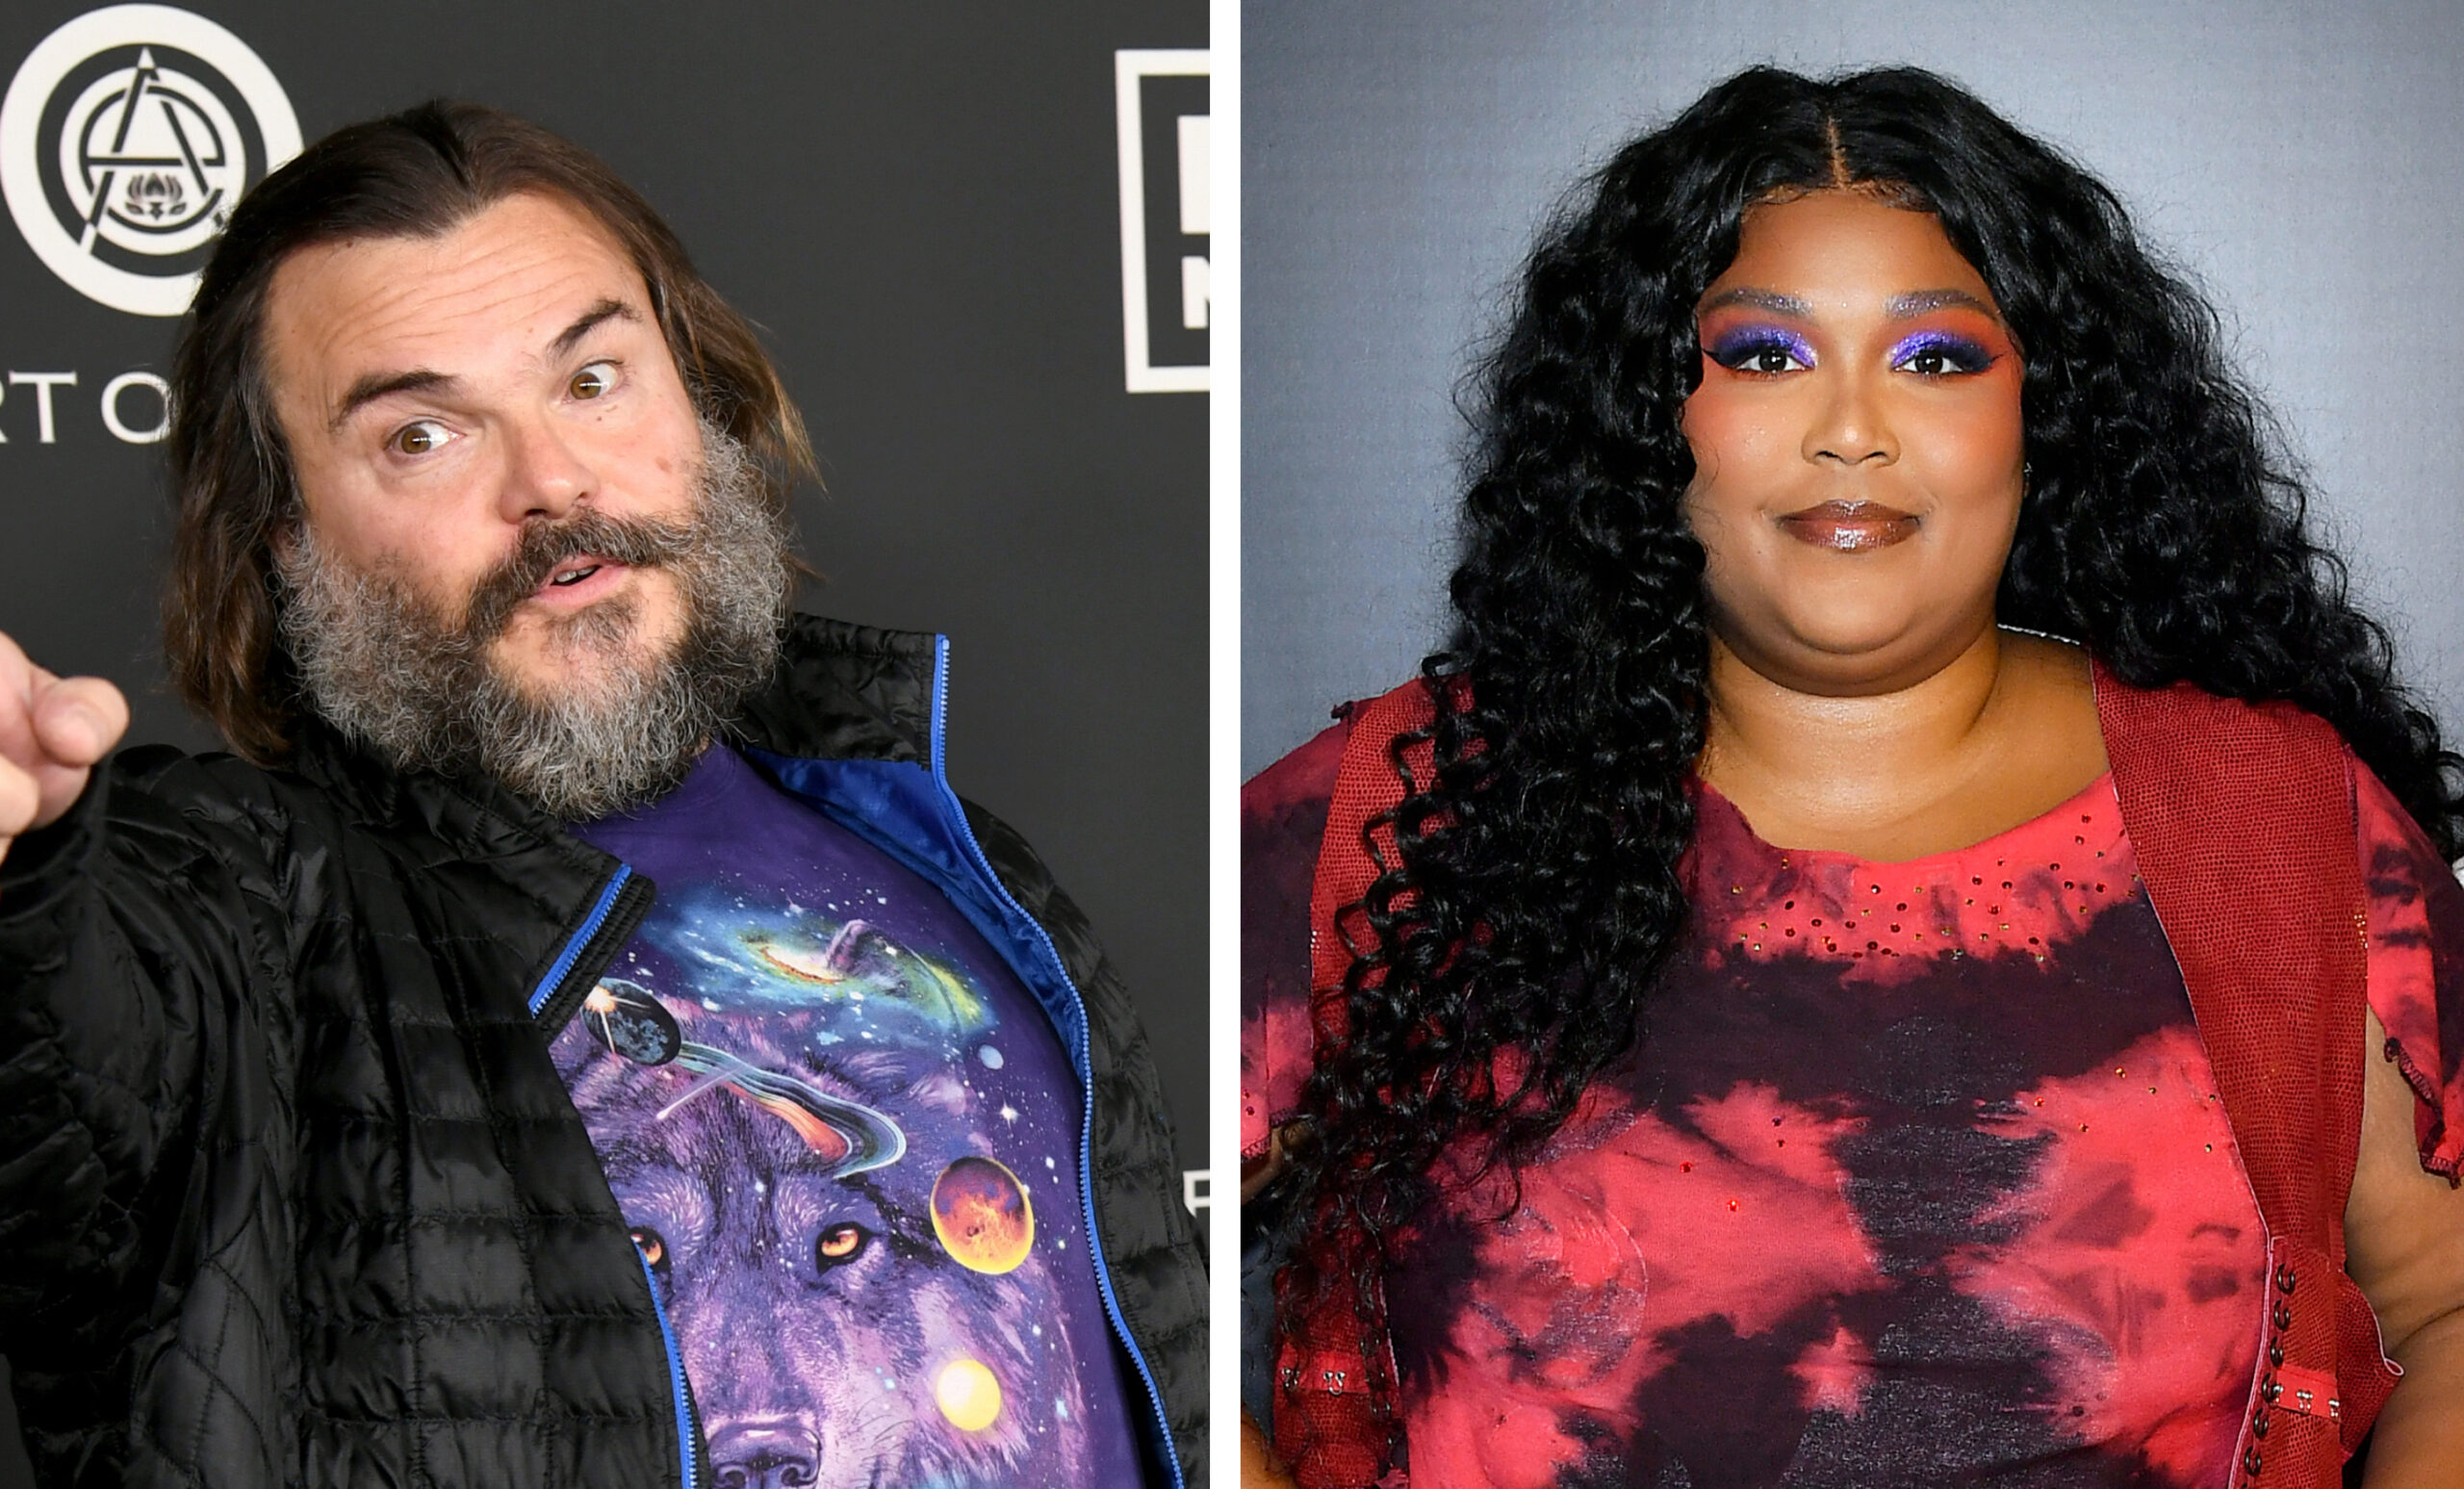 Lizzo And Jack Black Confuse ‘Star Wars’ Fans With Cameos In ‘The Mandalorian’